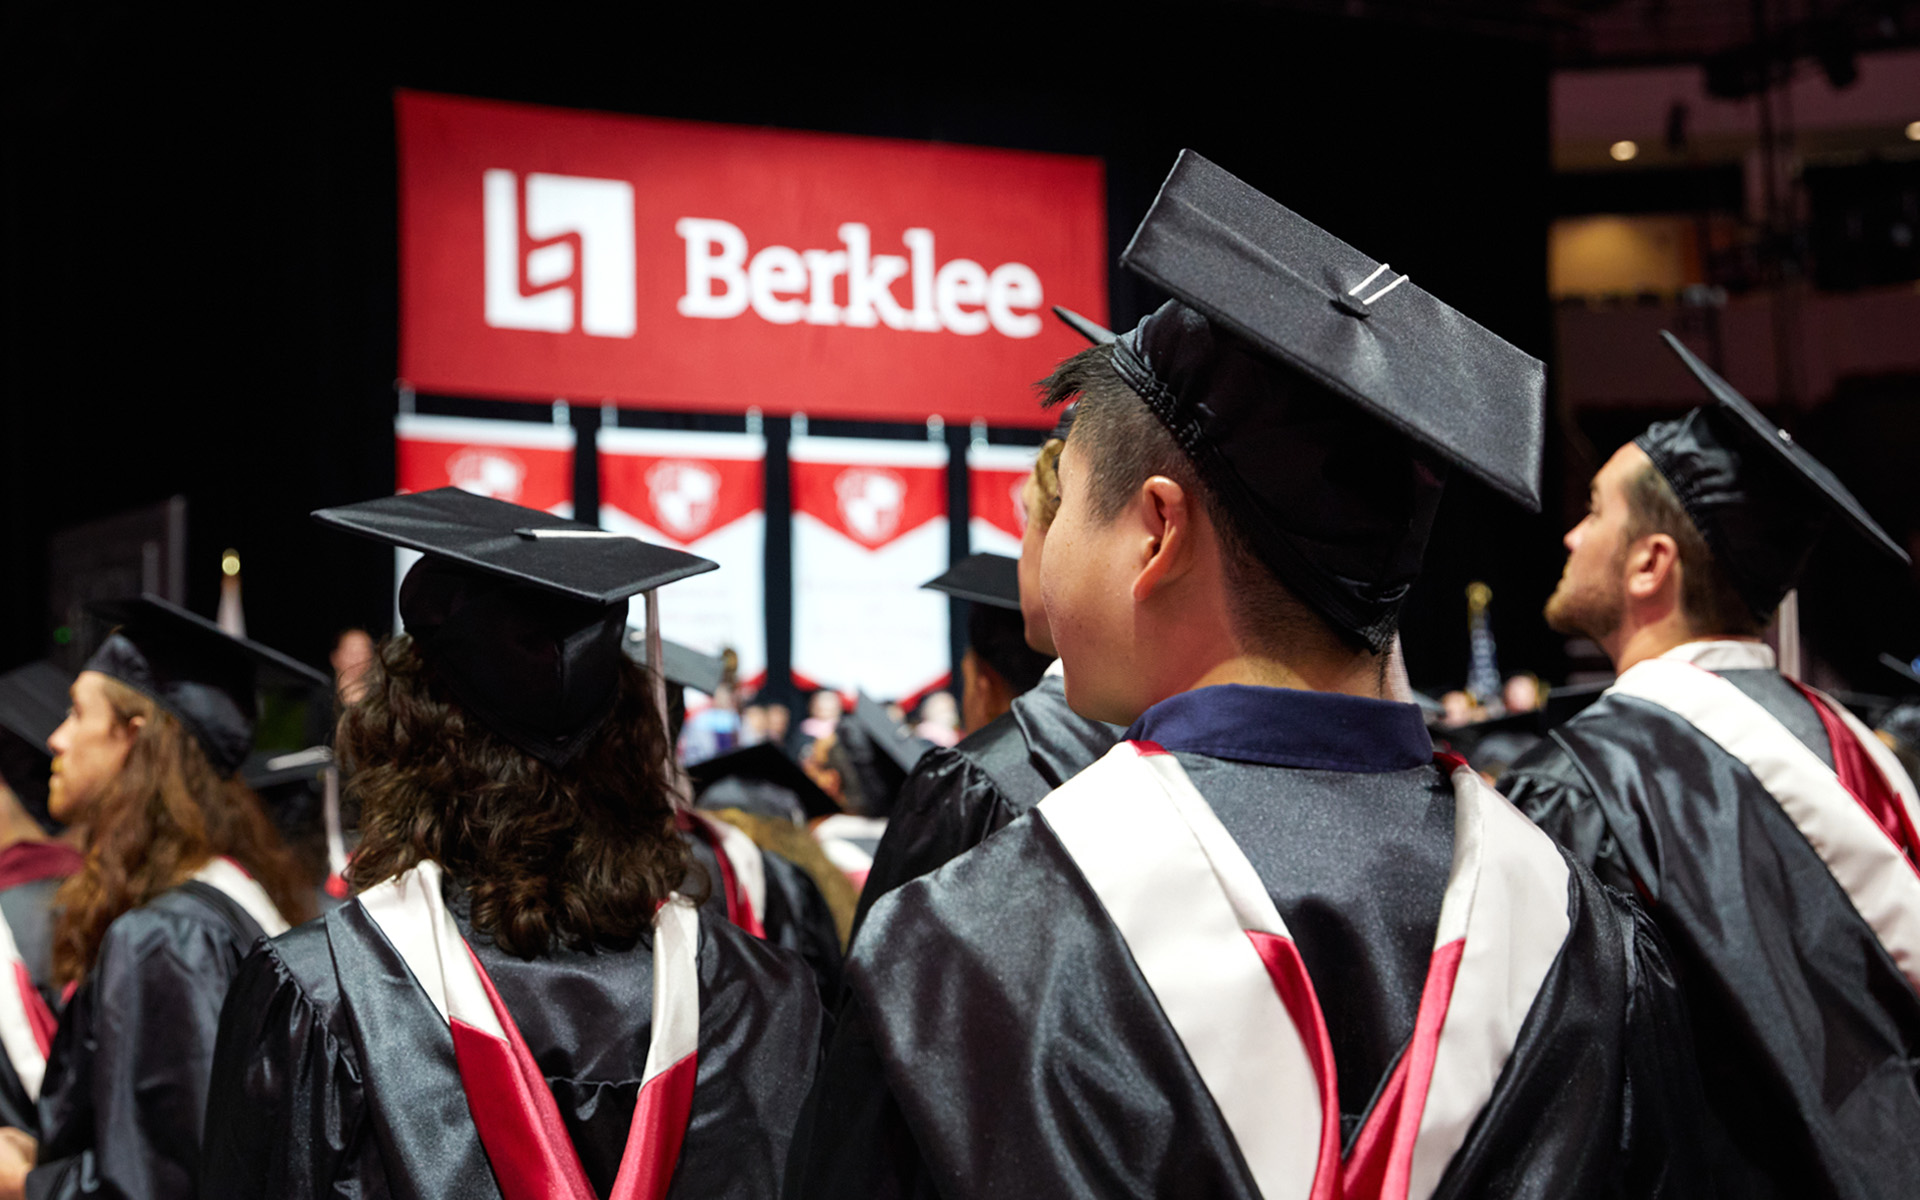 Berklee Online graduates with their caps and gowns on at Commencement.